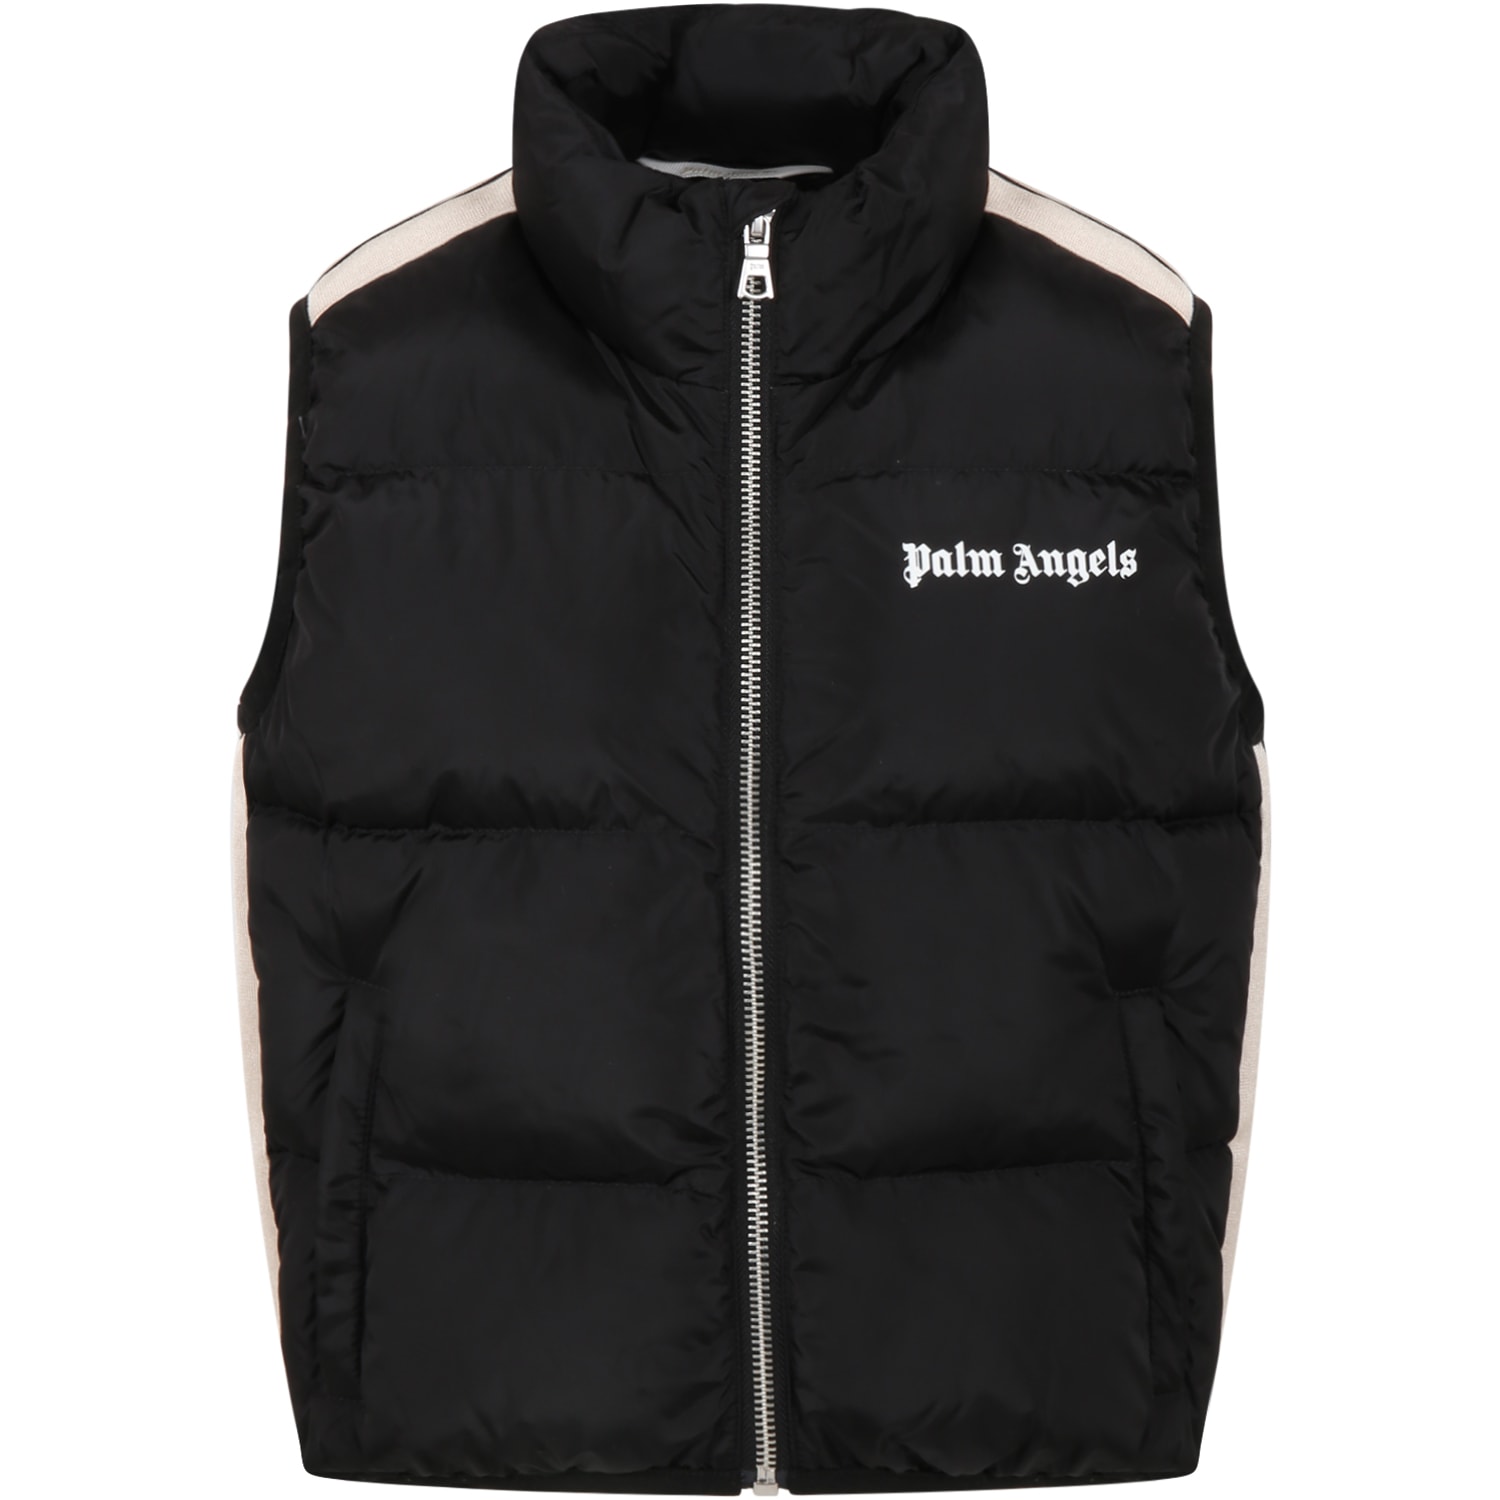 Palm Angels Black Vest For Kids With White Logo